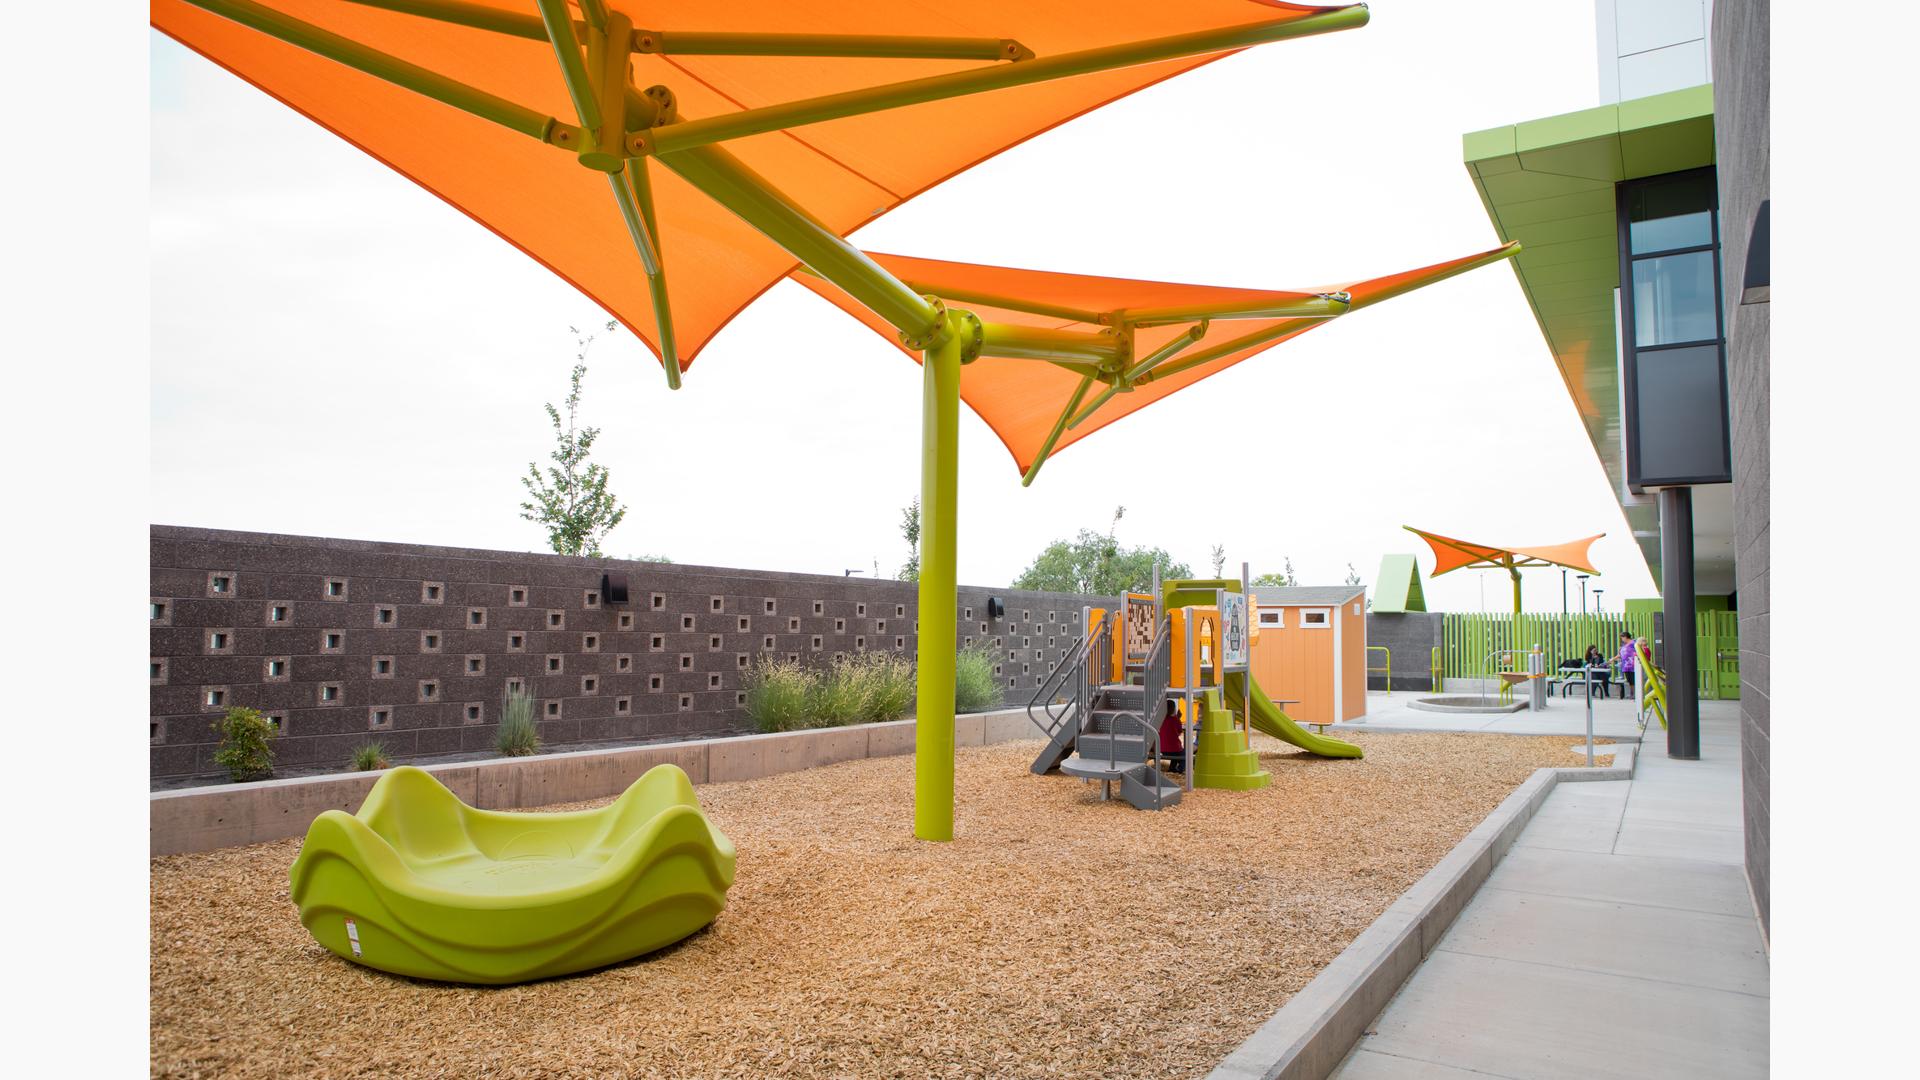 A green multi seat spinner sits under a brightly colored shade system with a small play structure in the background. The play area sits between a granite retaining wall and a building.